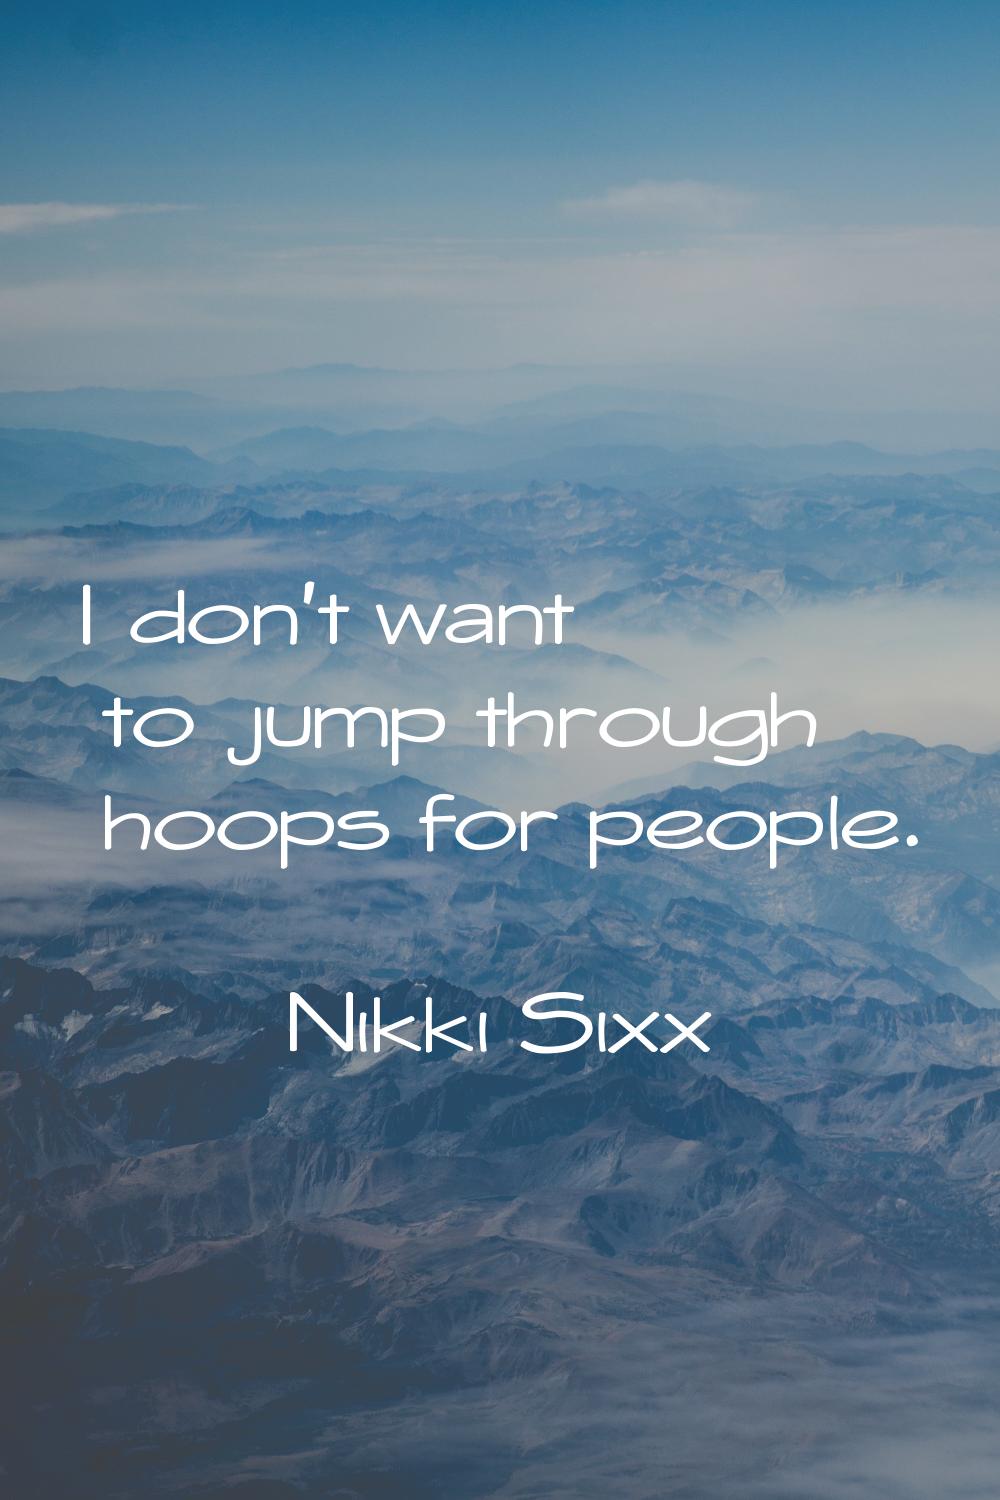 I don't want to jump through hoops for people.